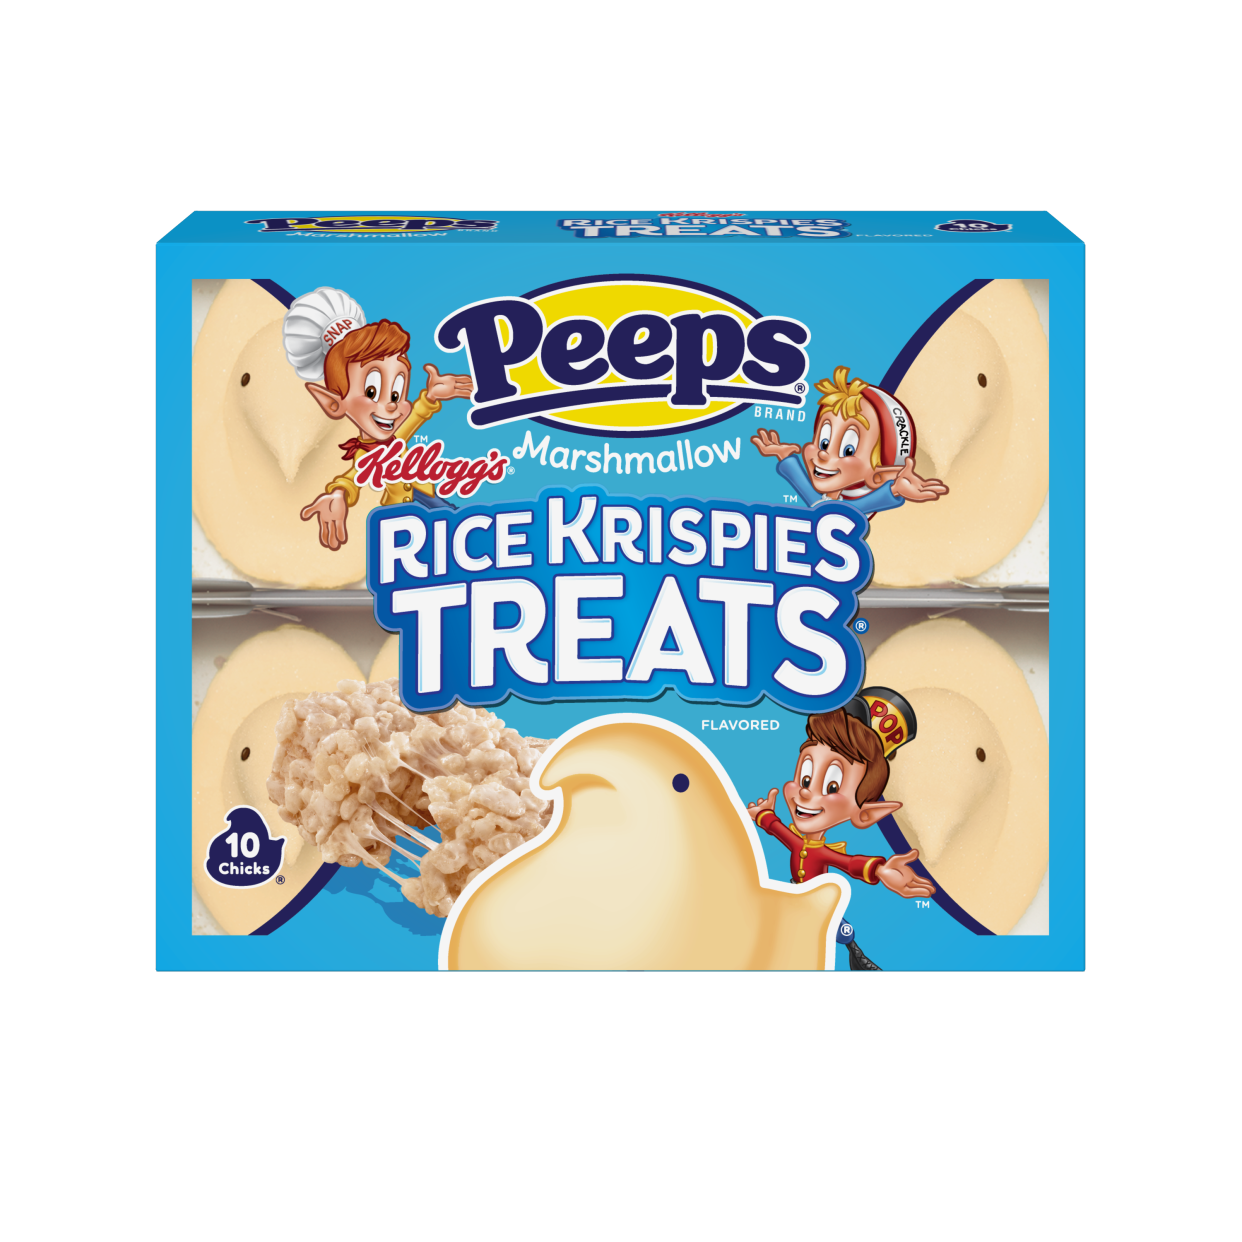 Peeps Rice Krispies Treats Flavored Marshmallow Chicks is one of four new flavors the company launched as part of its Easter 2024 candy lineup.